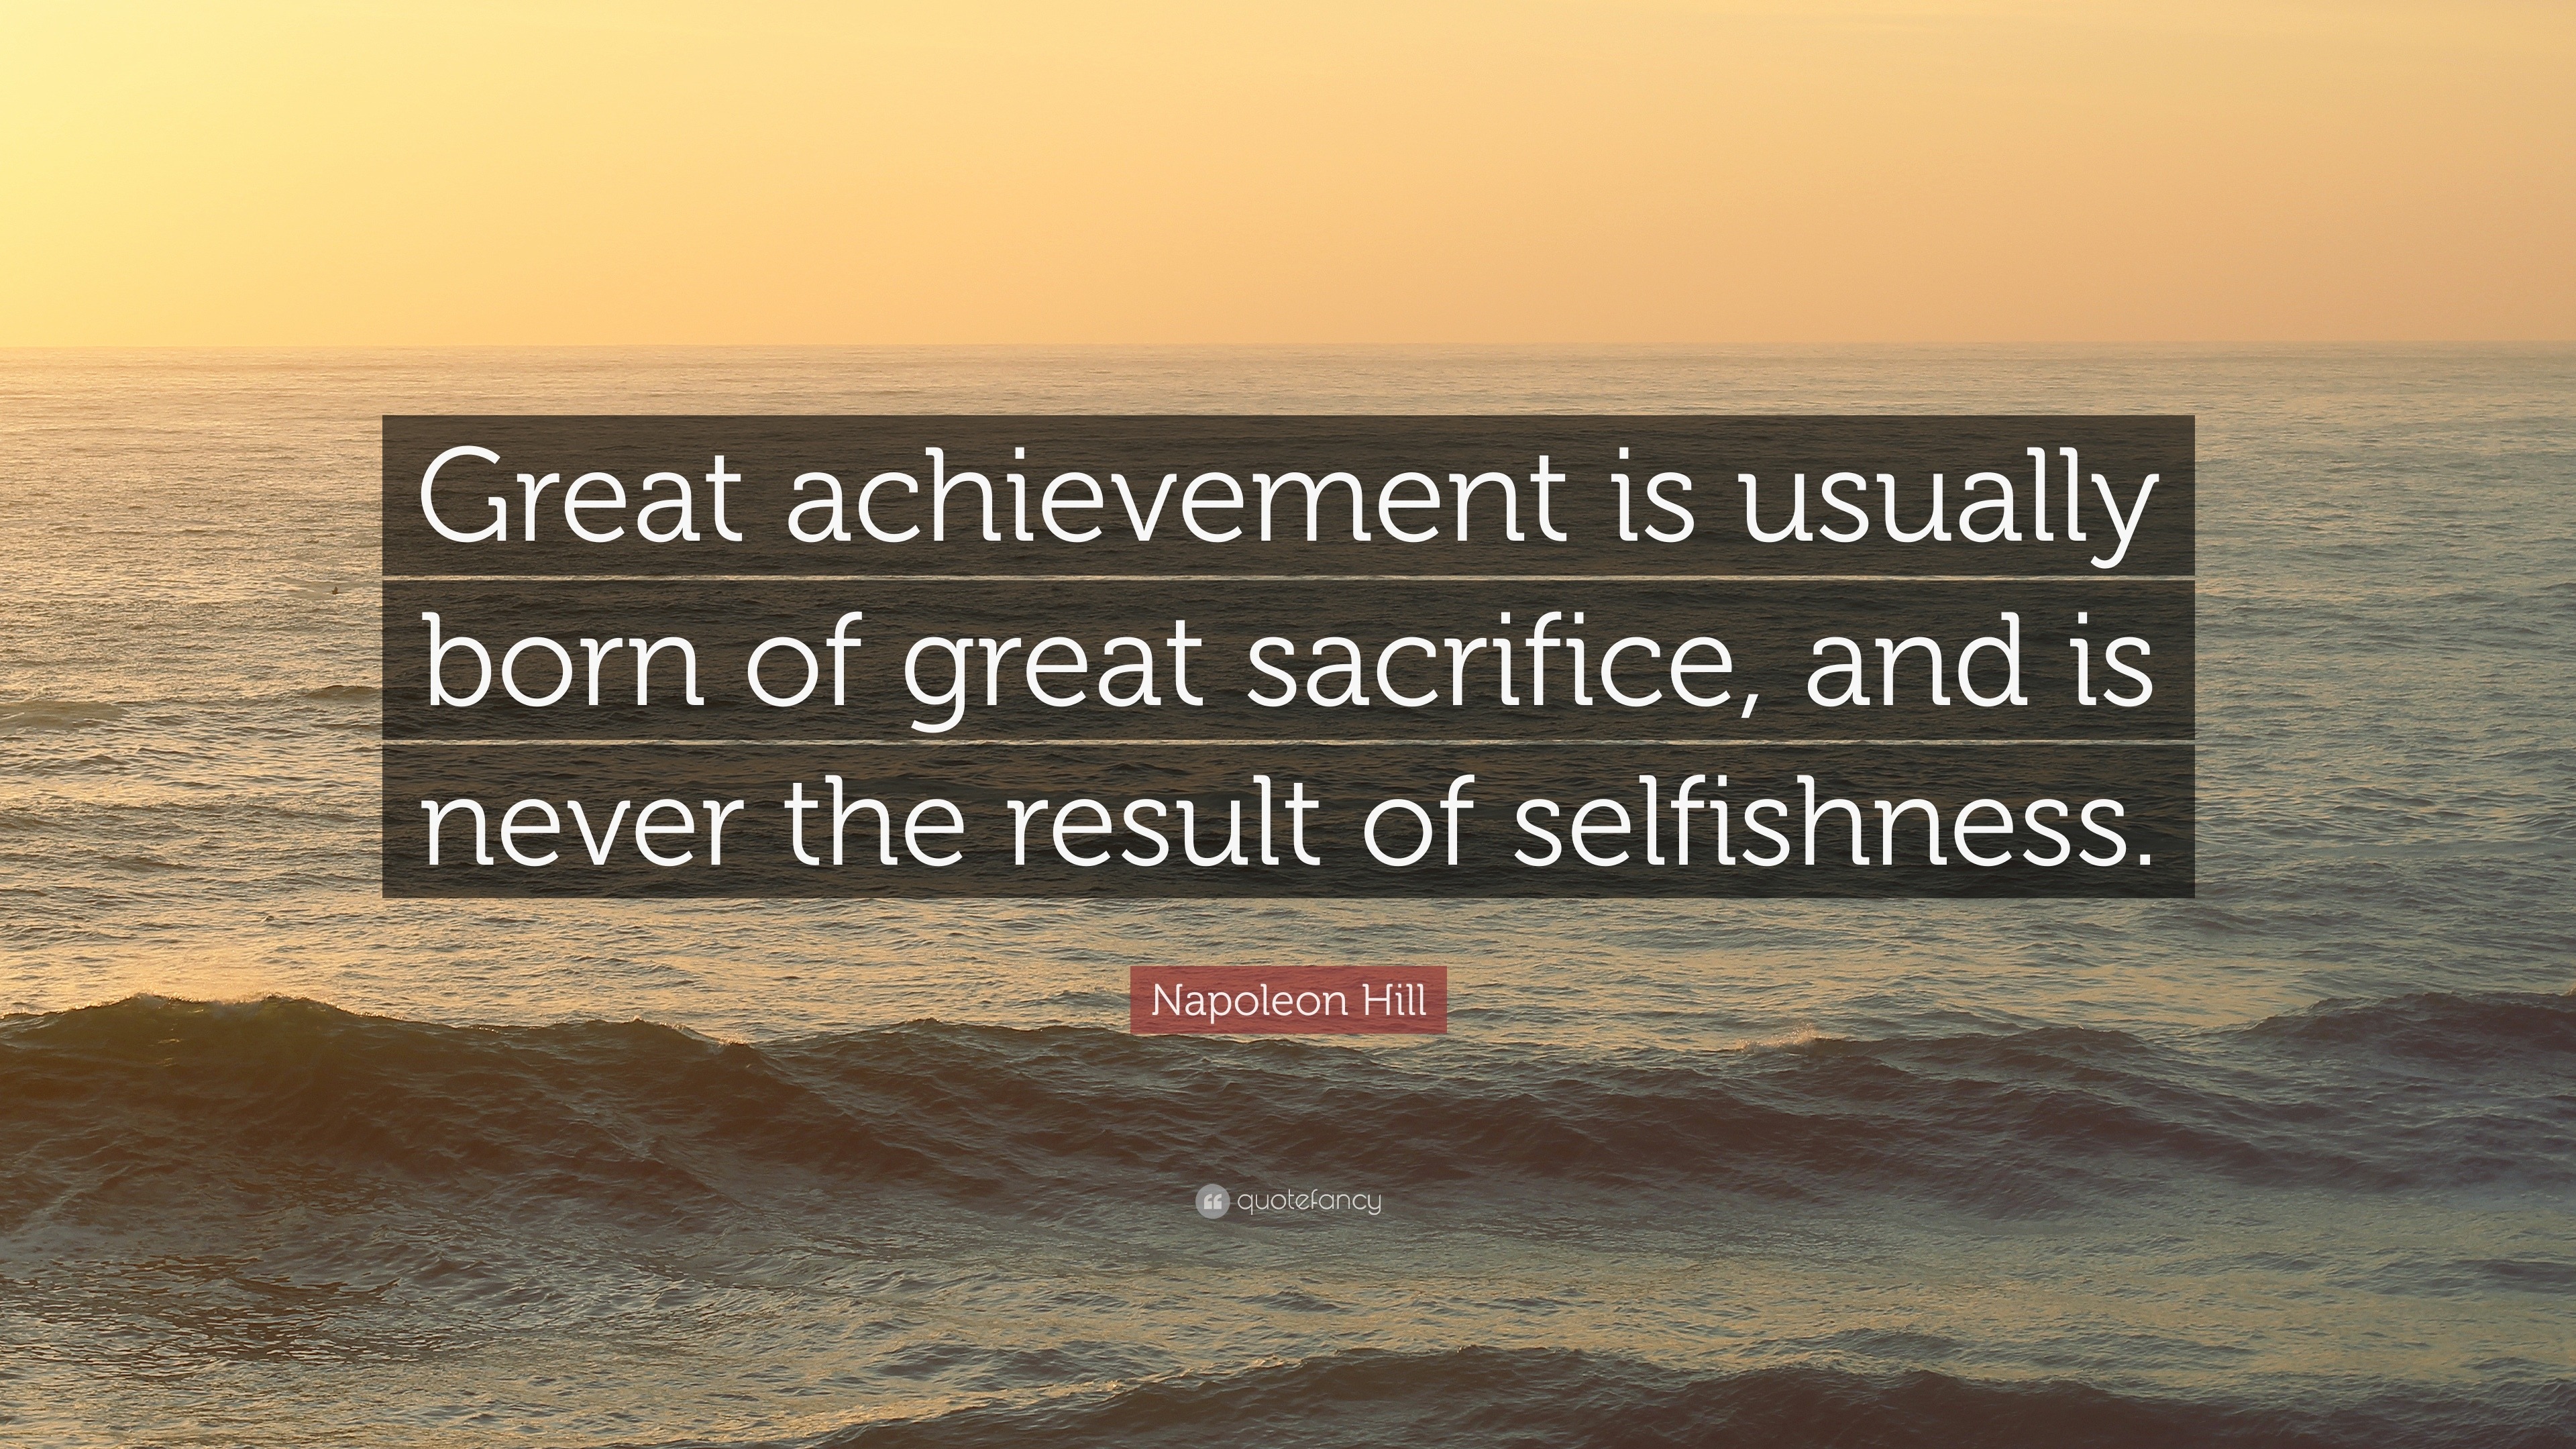 Napoleon Hill Quote “Great achievement is usually born of